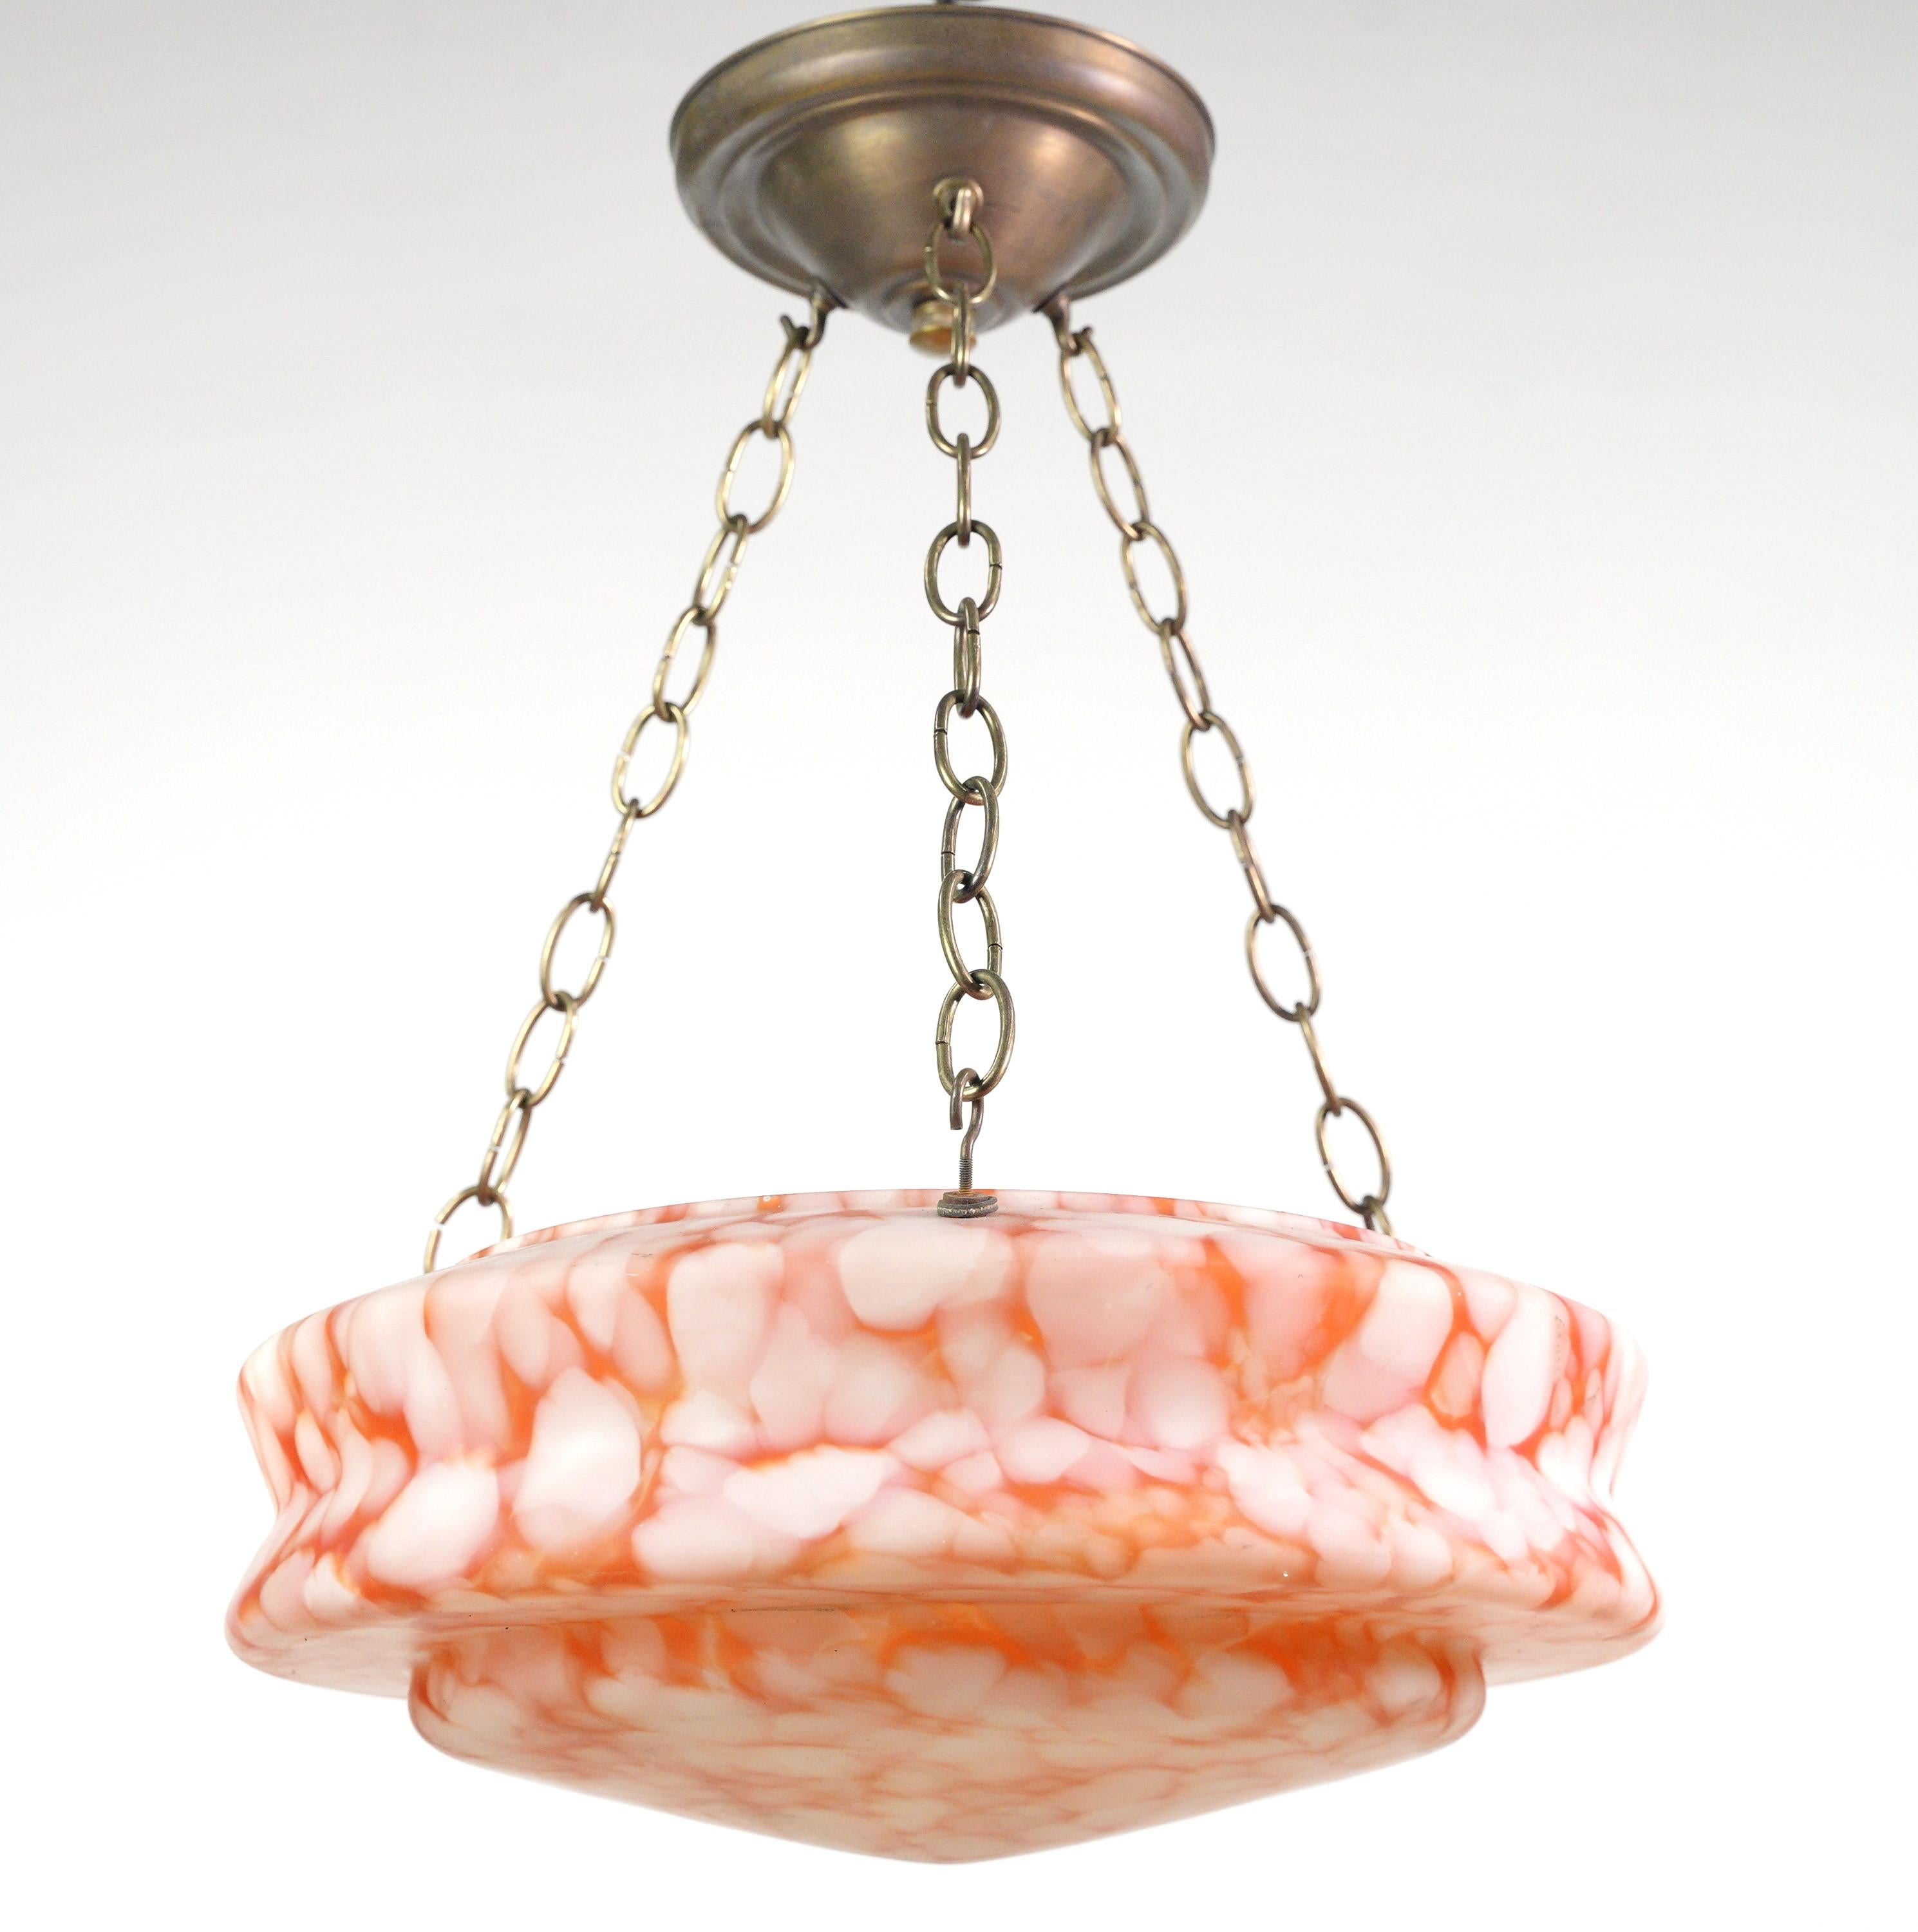 Contemporary orange & white glass and brass chain dish pendant light combines retro charm with modern aesthetics, featuring a marbled orange and white glass dish suspended by a brass chain, creating a unique and eye catching lighting element. Three